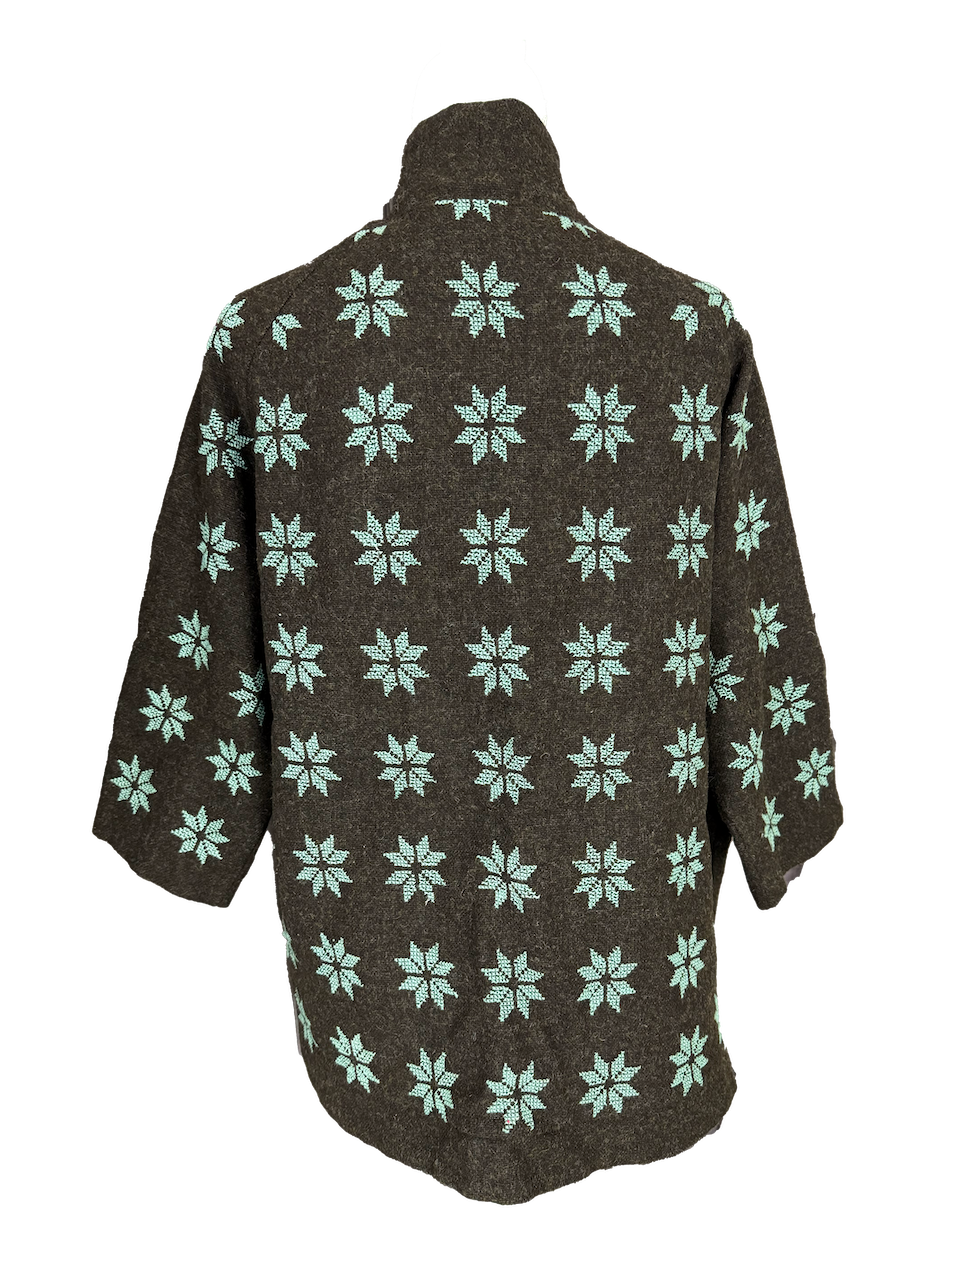 The Heavily Embroidered Round Jacket in Dark Brown With Star Embroidery